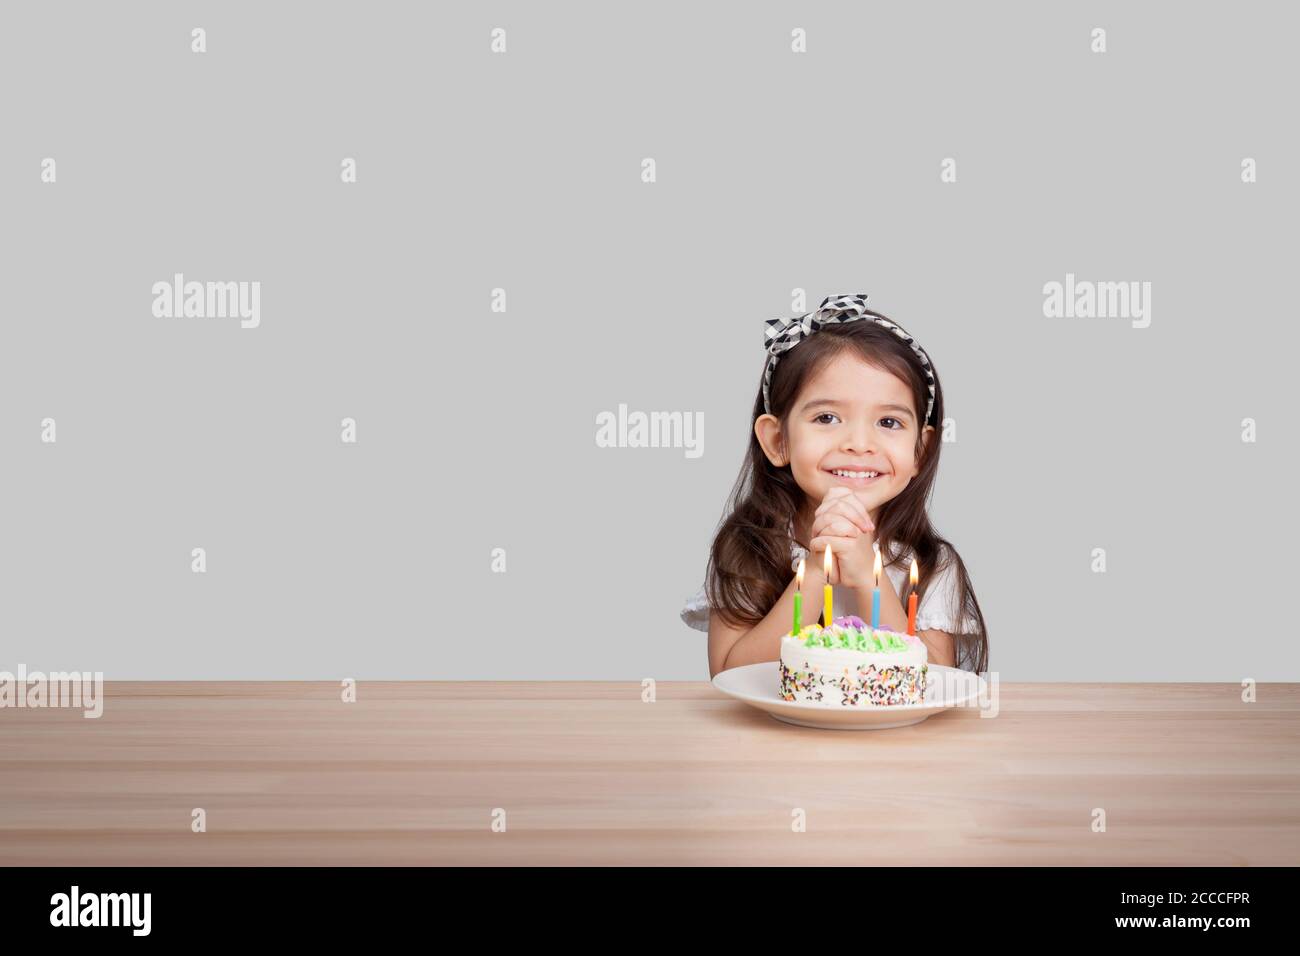 cute girl make a wish on birthday. Happy Birthday background. Greeting background for card, flyer, poster, sign, banner, web, postcard, invitation. Stock Photo